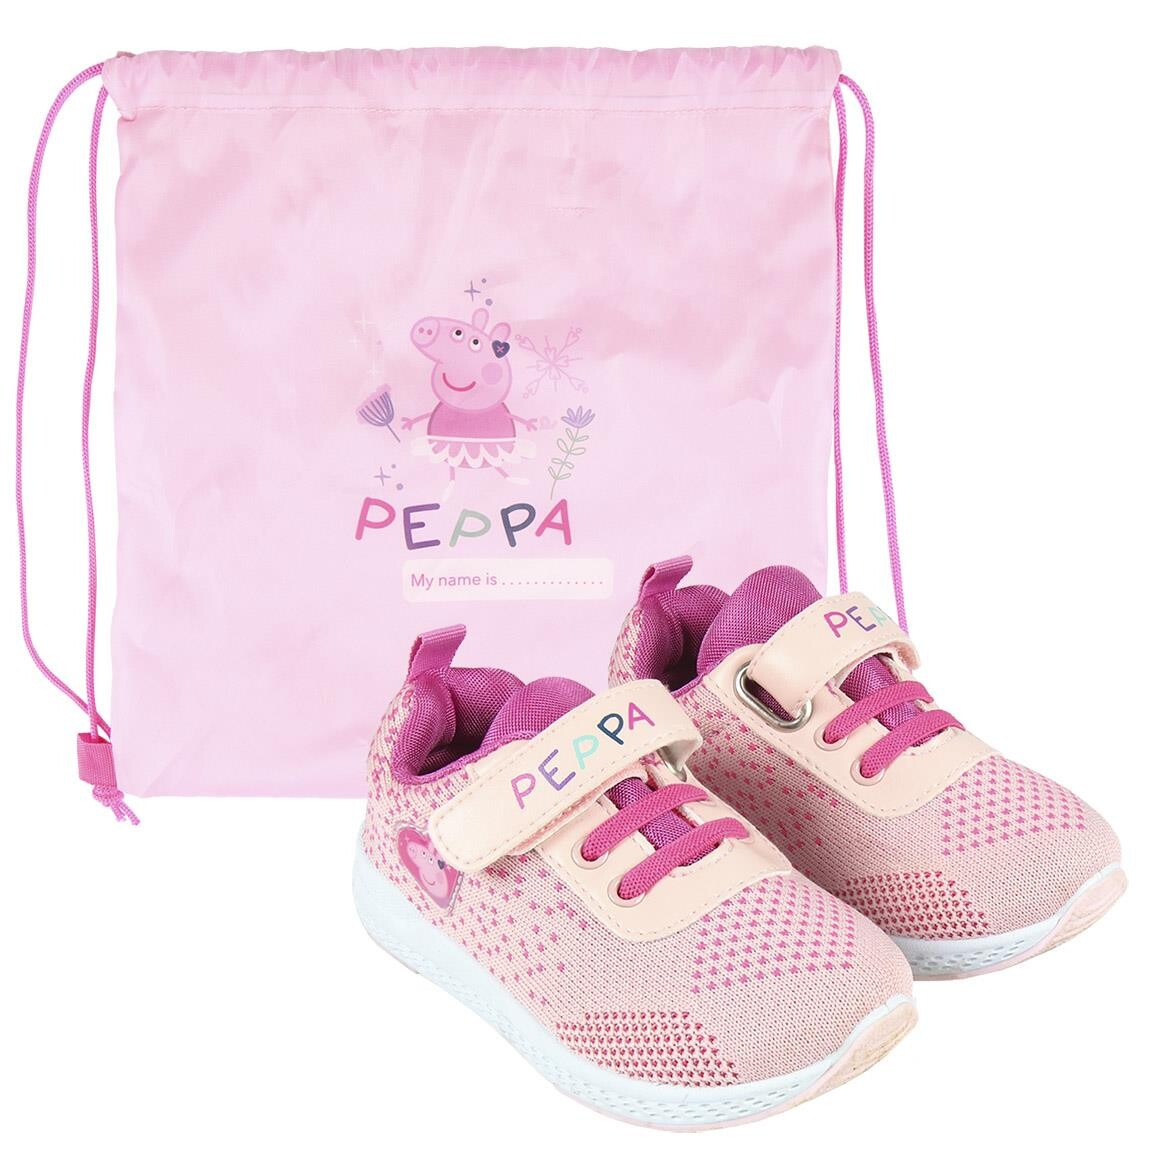 kolf idioom biografie Baby shoes - Peppa Pig | Clothes and accessories for merchandise fans